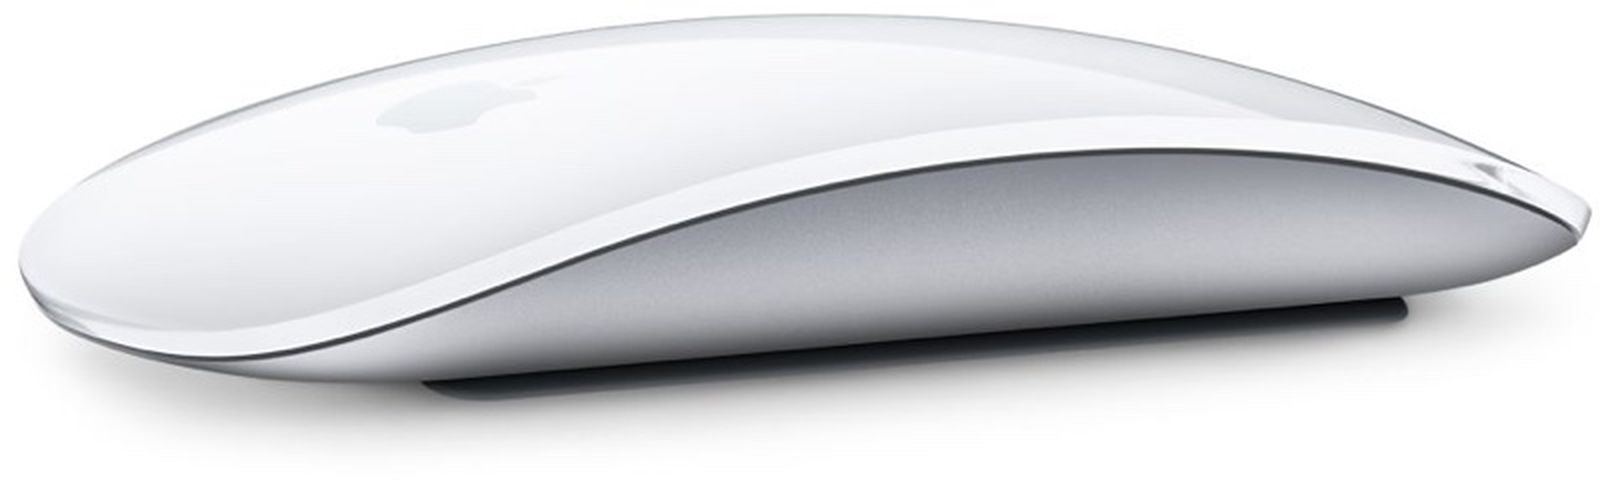 how to open a mac mouse